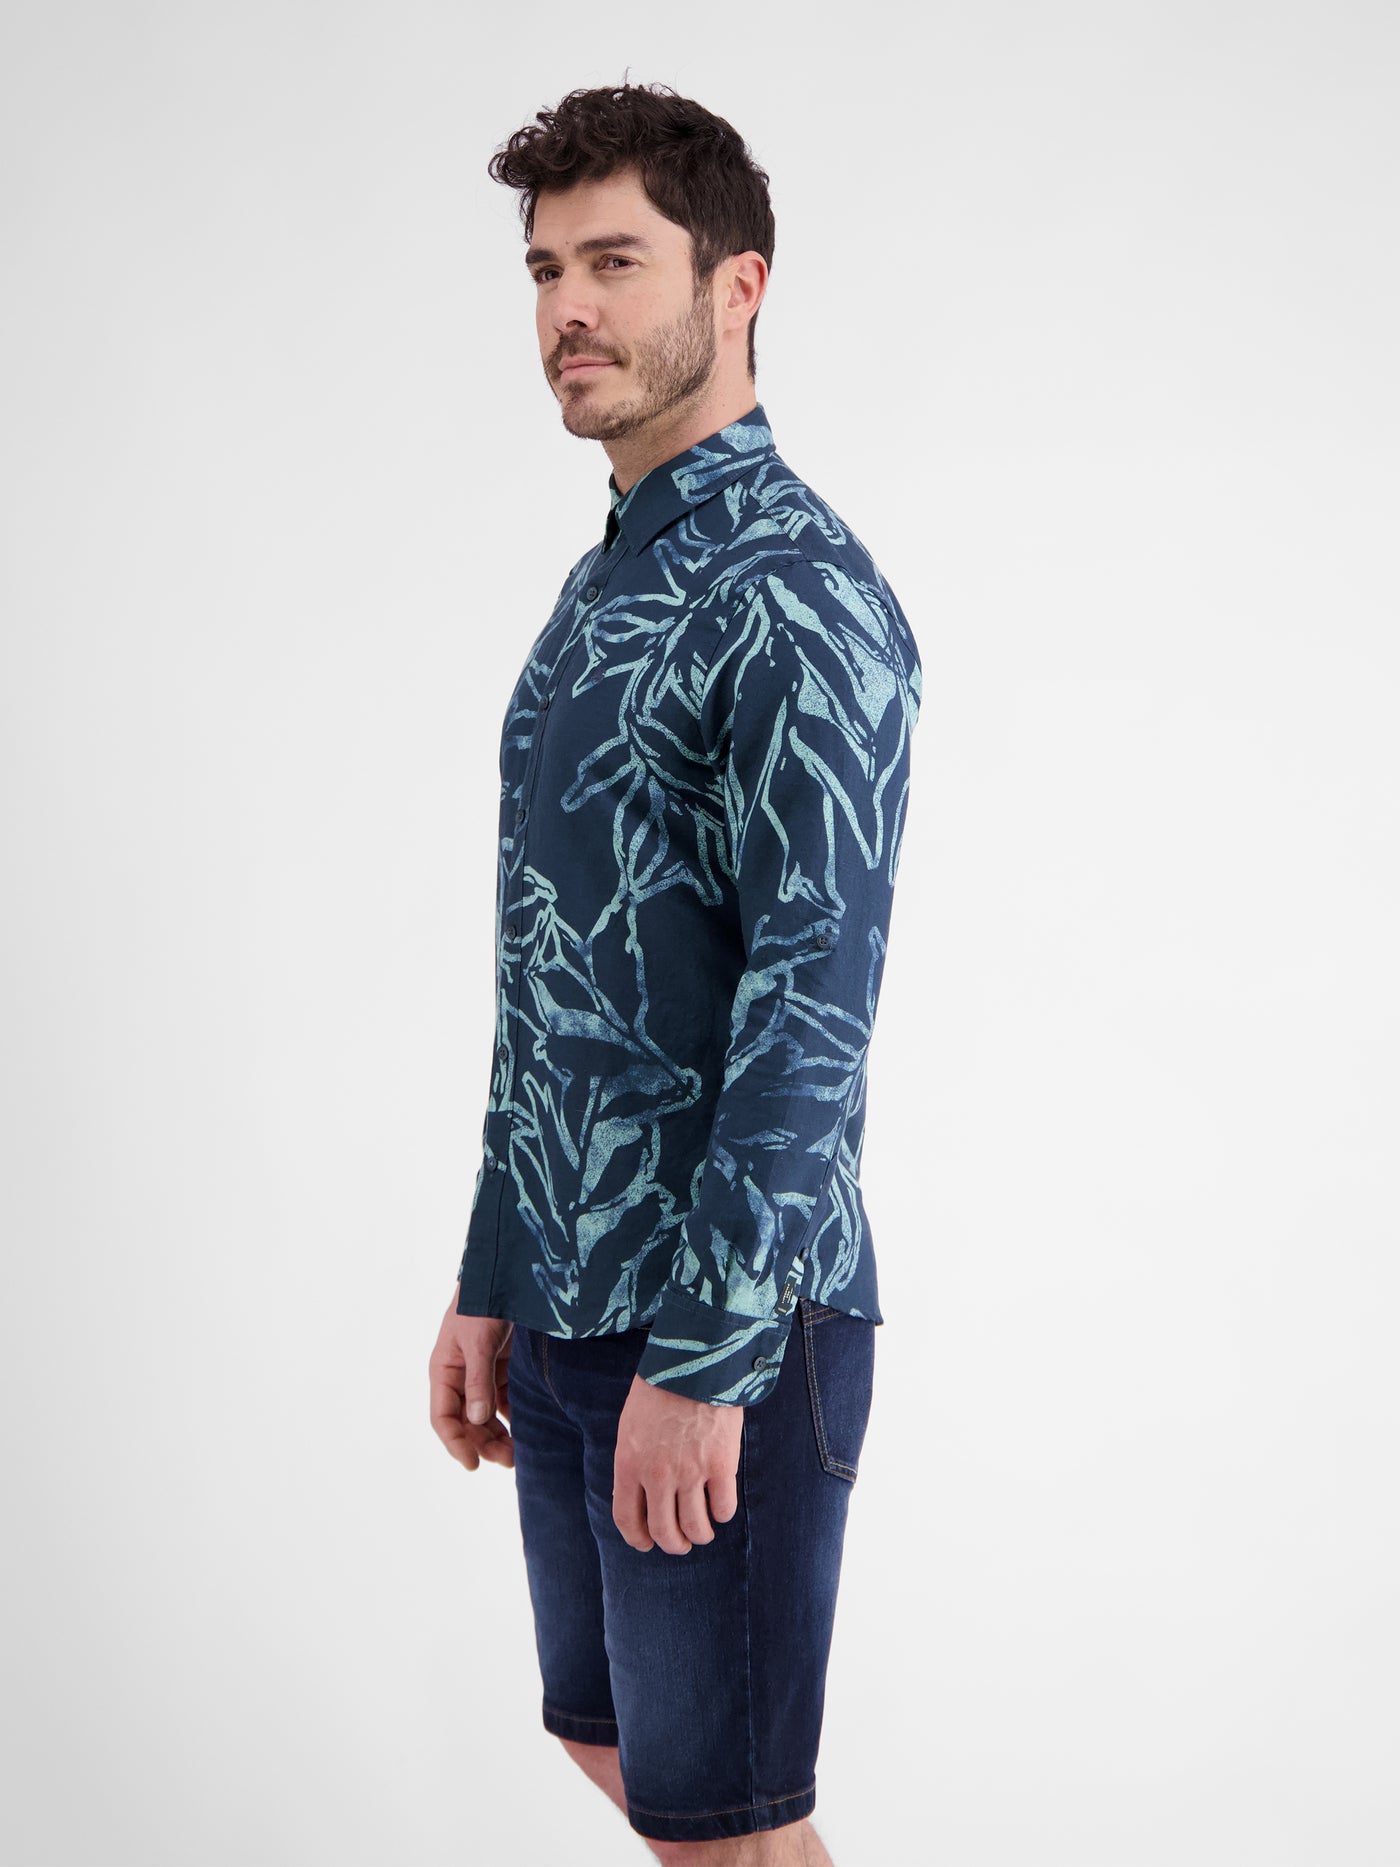 Summery, light long-sleeved shirt with a floral print